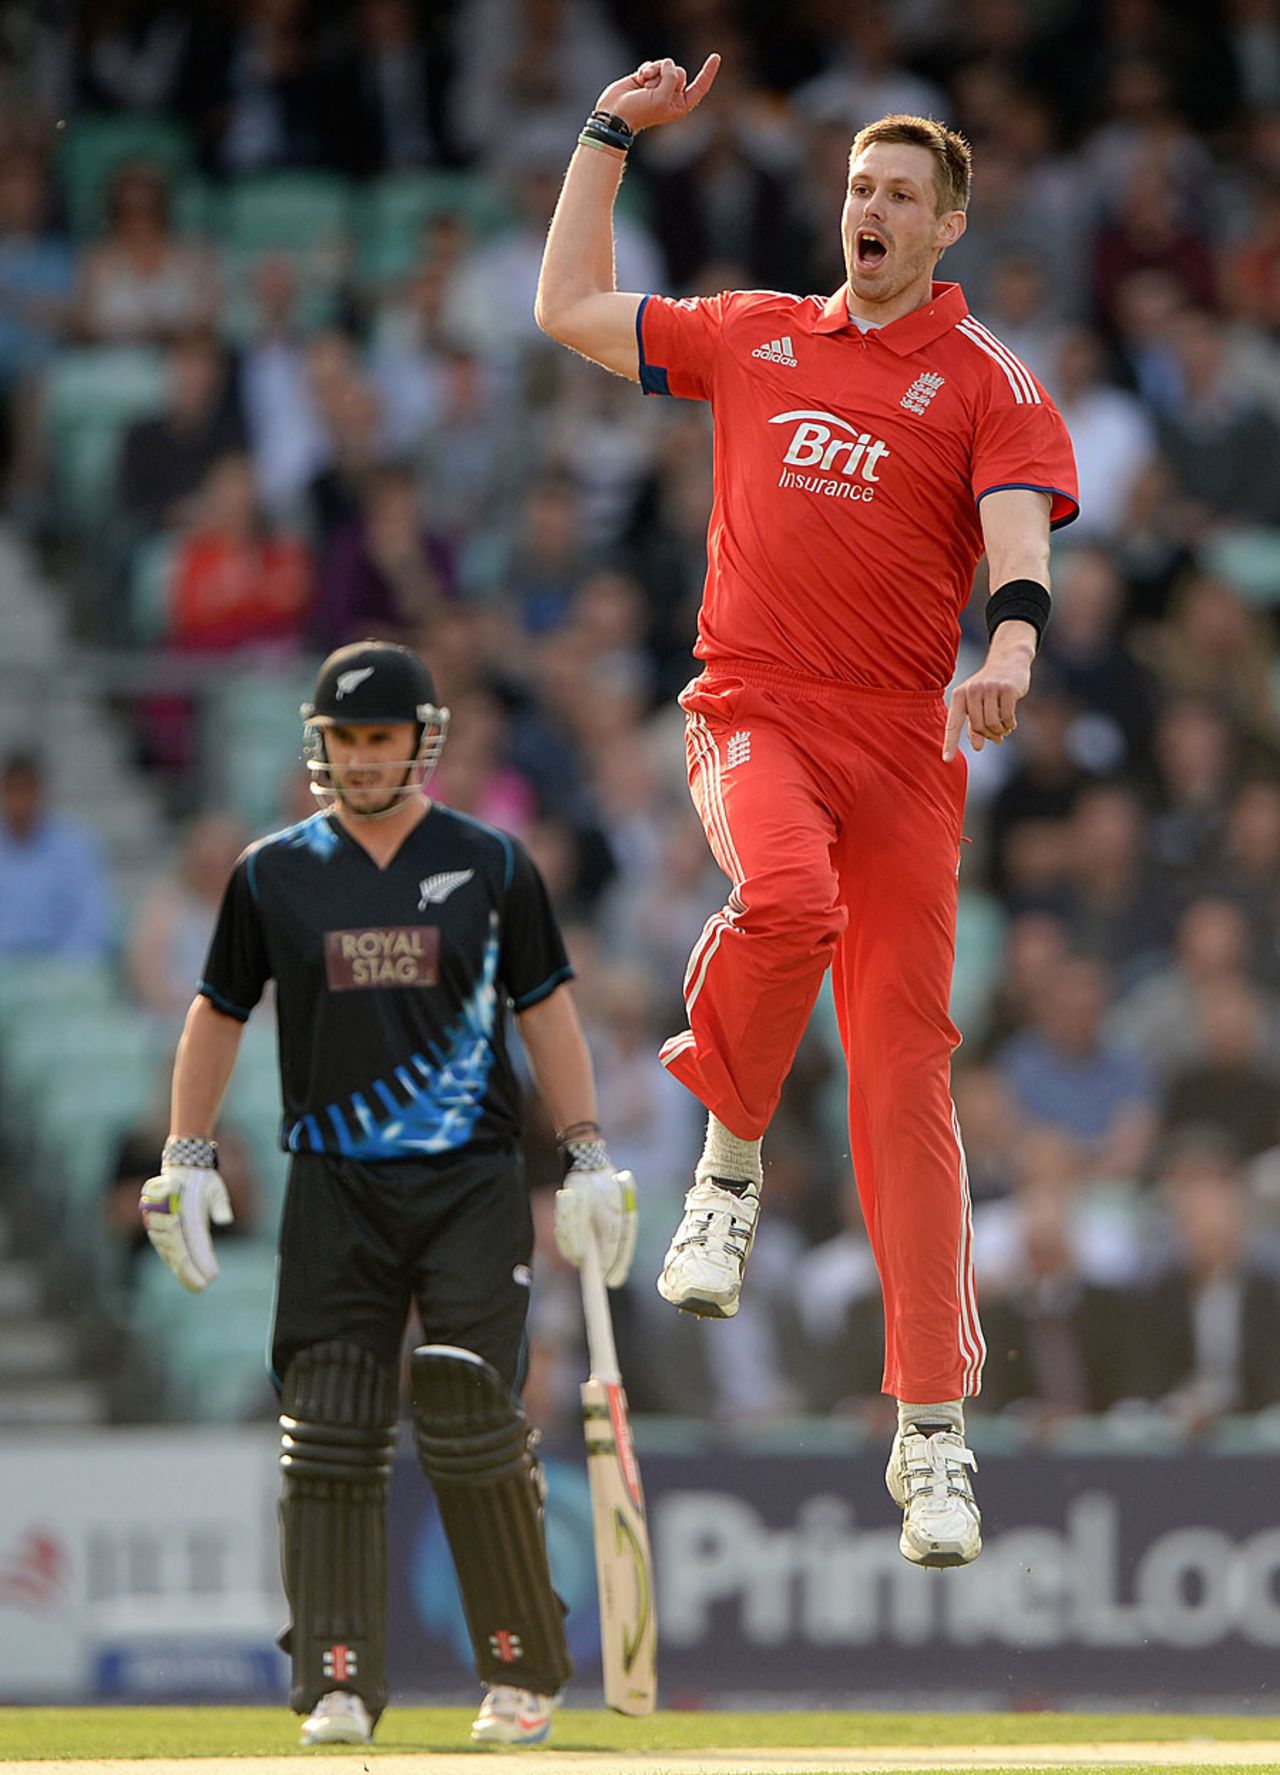 Boyd Rankin celebrates his first wicket for England, England v New Zealand, 1st T20, The Oval, June 25, 2013